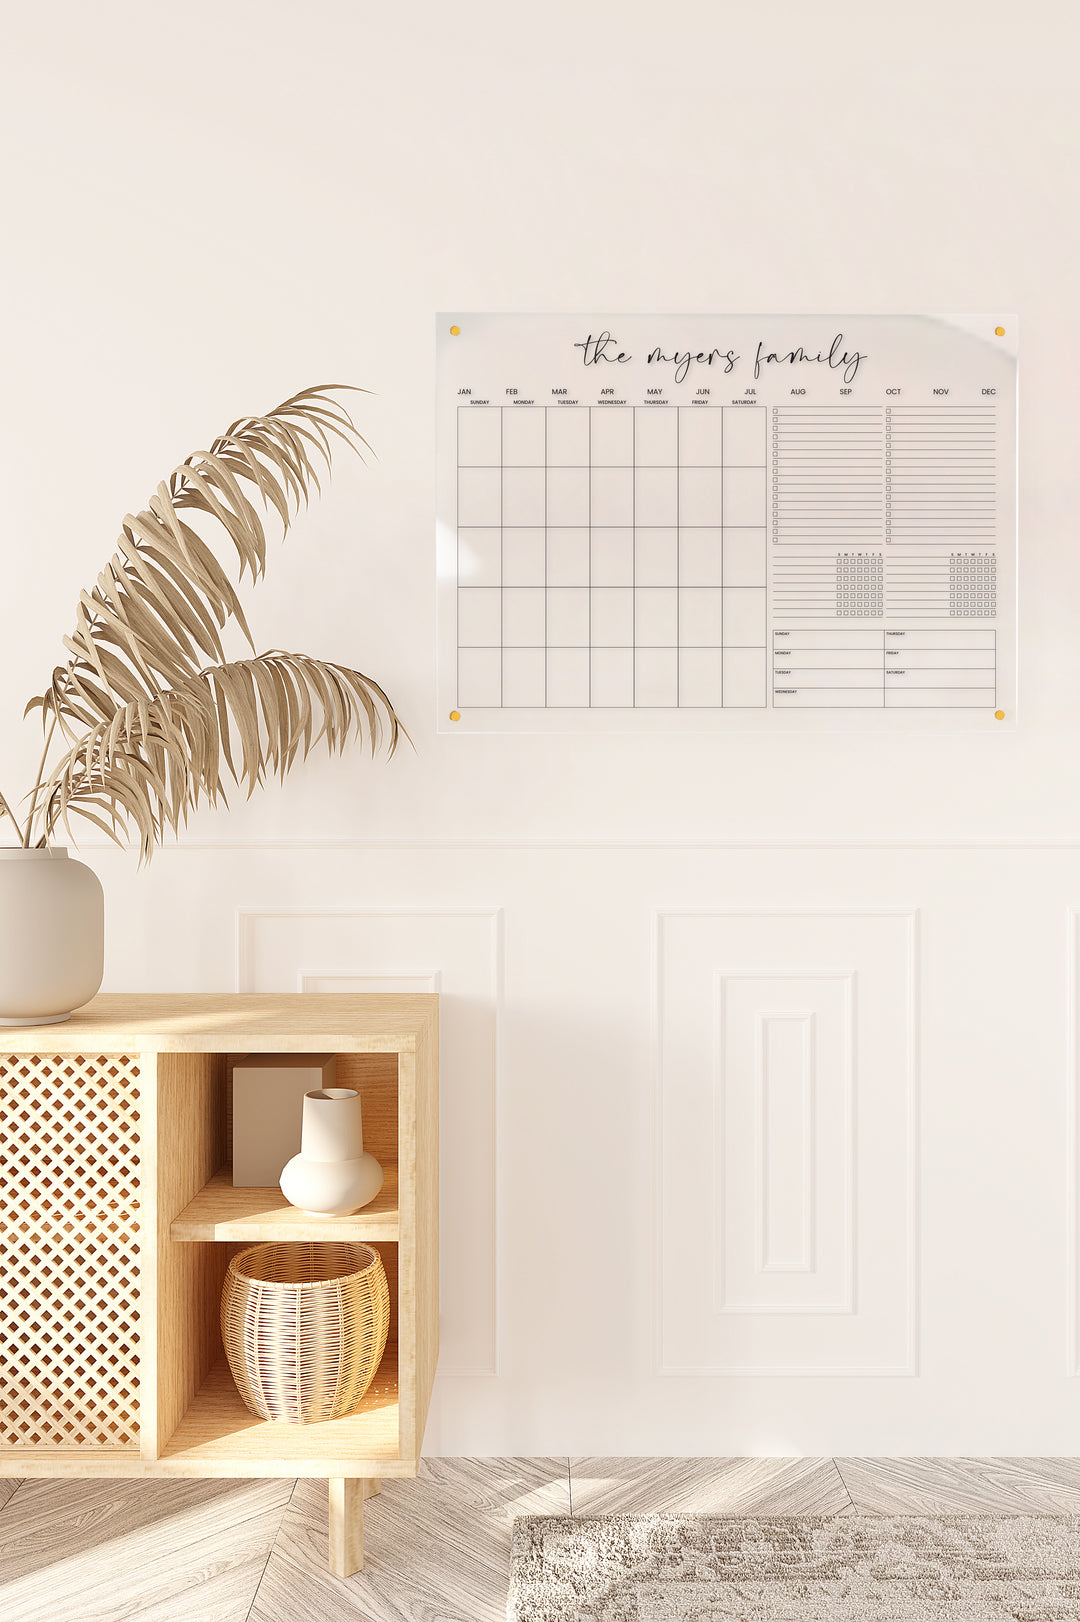 Acrylic Monthly Calendar with Weekly Planner & To-Do List